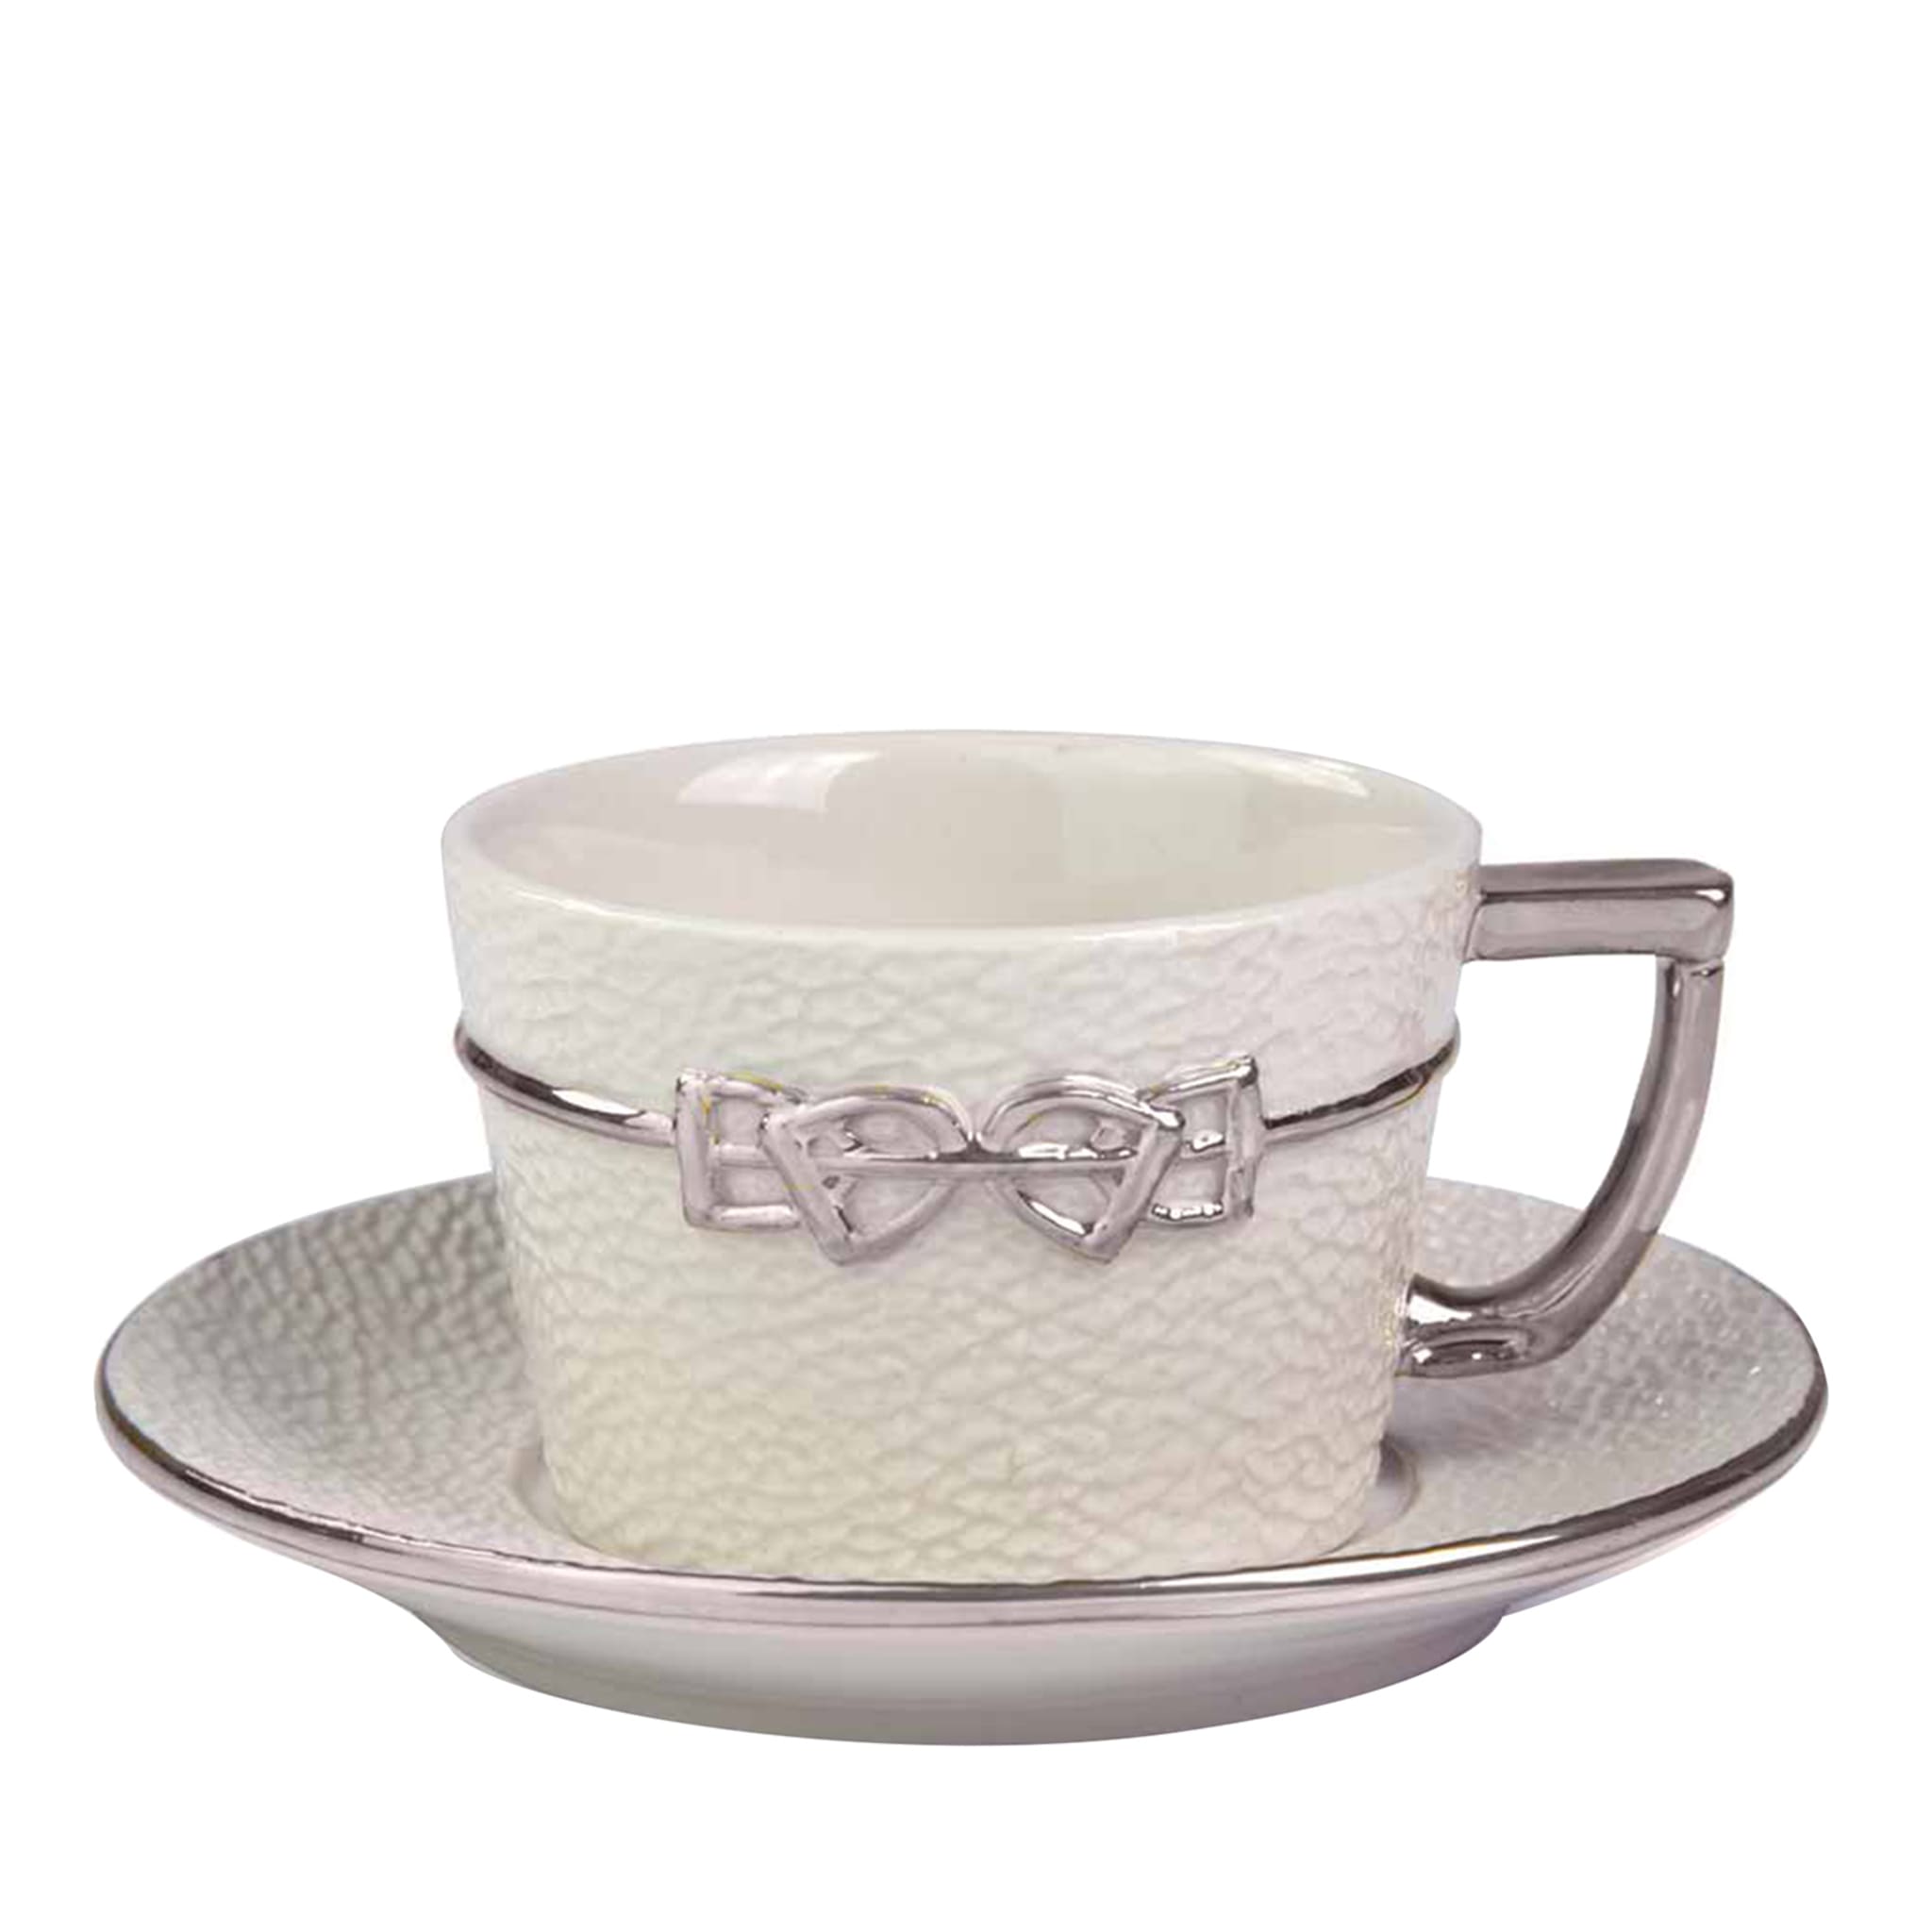 DRESSAGE COFFEE CUP AND SAUCER - WHITE AND SILVER - Main view